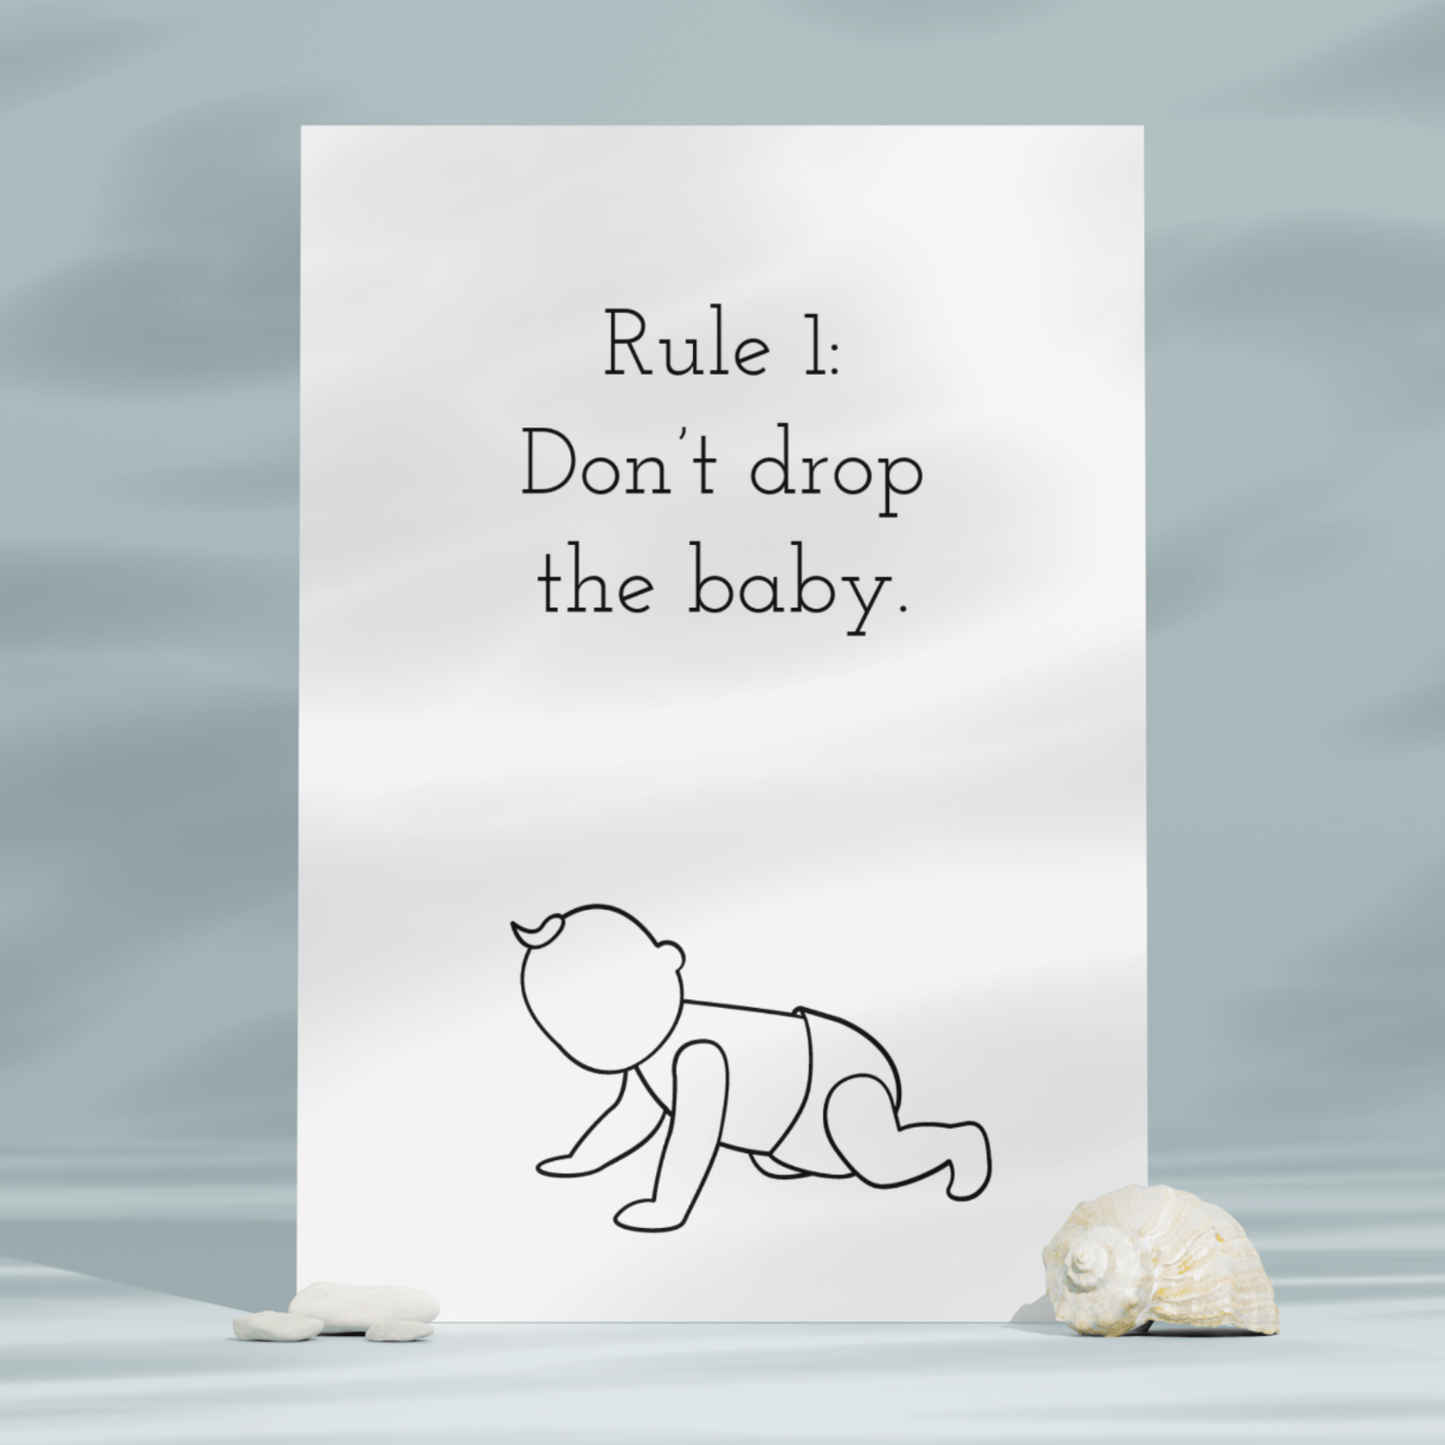 Little Kraken's Rule 1: Don't Drop the Baby, New Baby Cards for £3.50 each